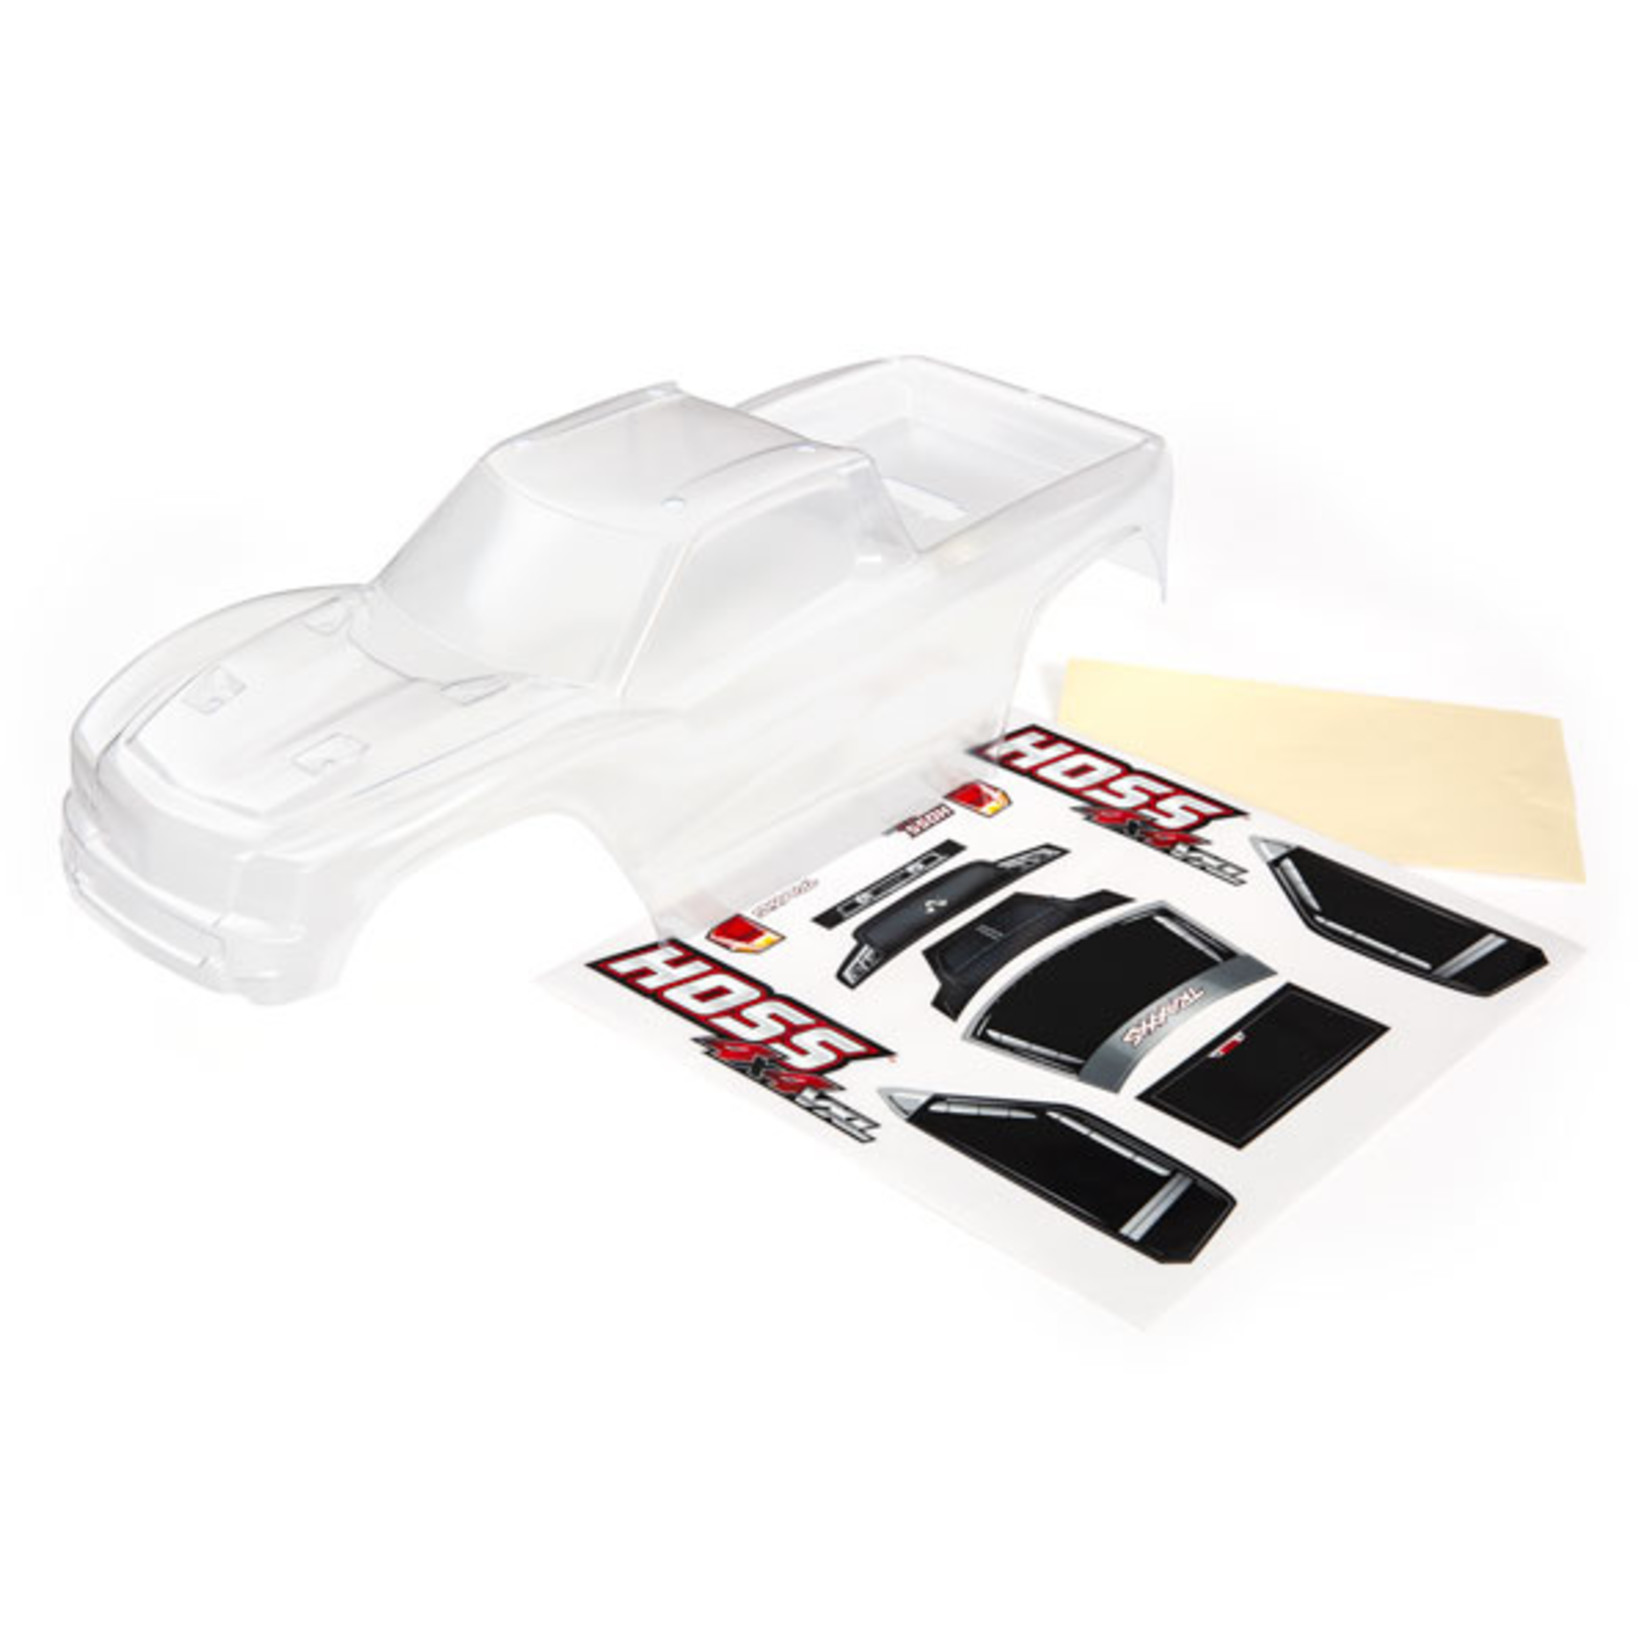 Traxxas 9011 - Body, Hoss 4X4 VXL (clear, requires paintin